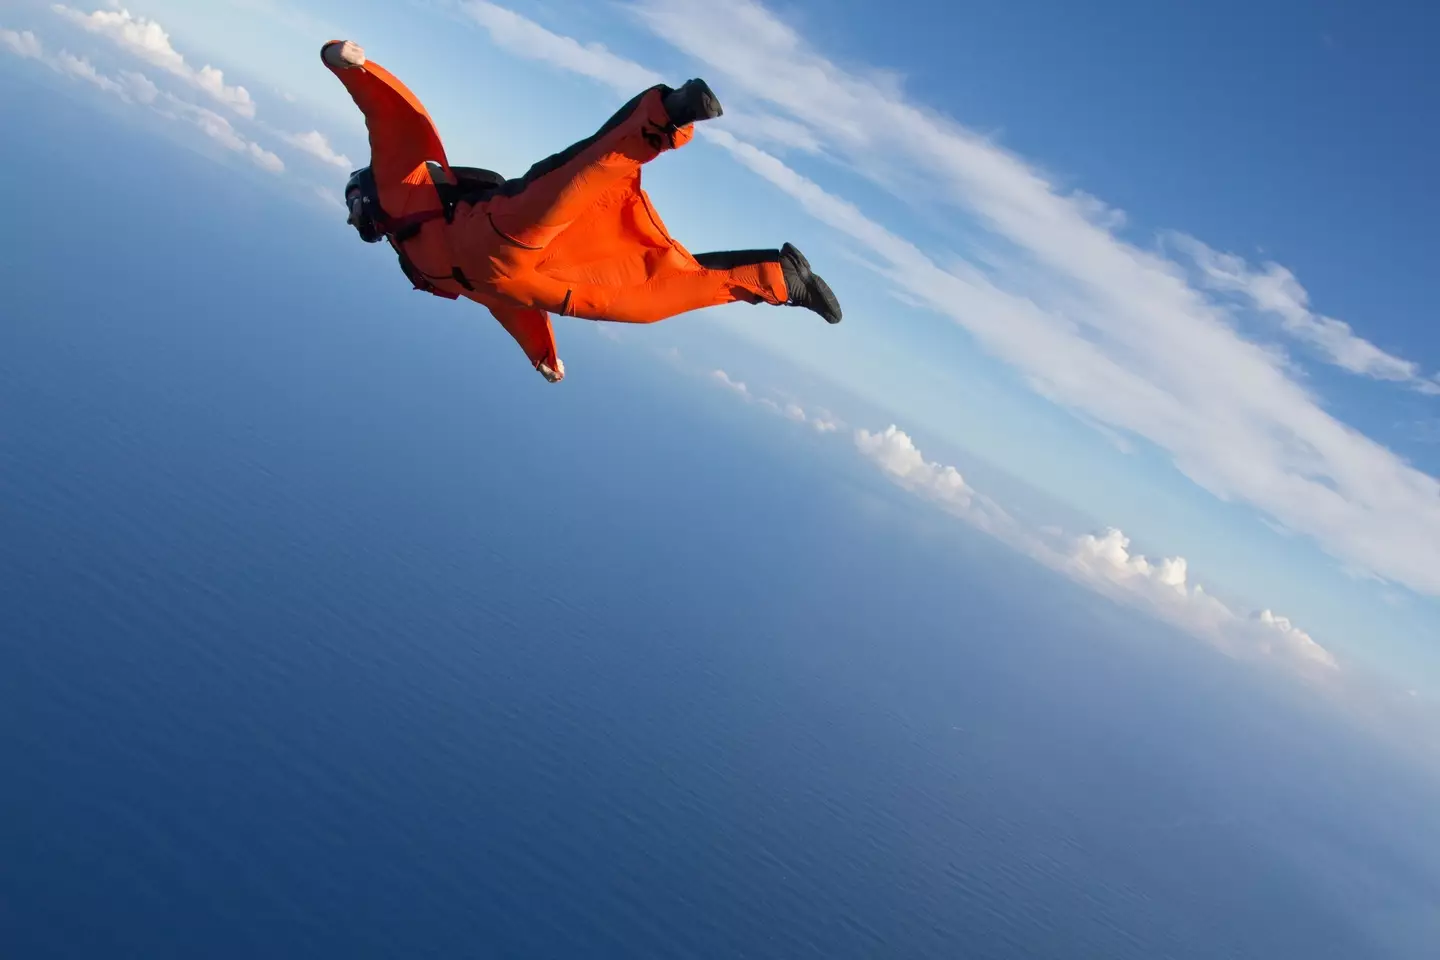 Nicolas Galy (not pictured) was wearing a wingsuit when he jumped from the aircraft.